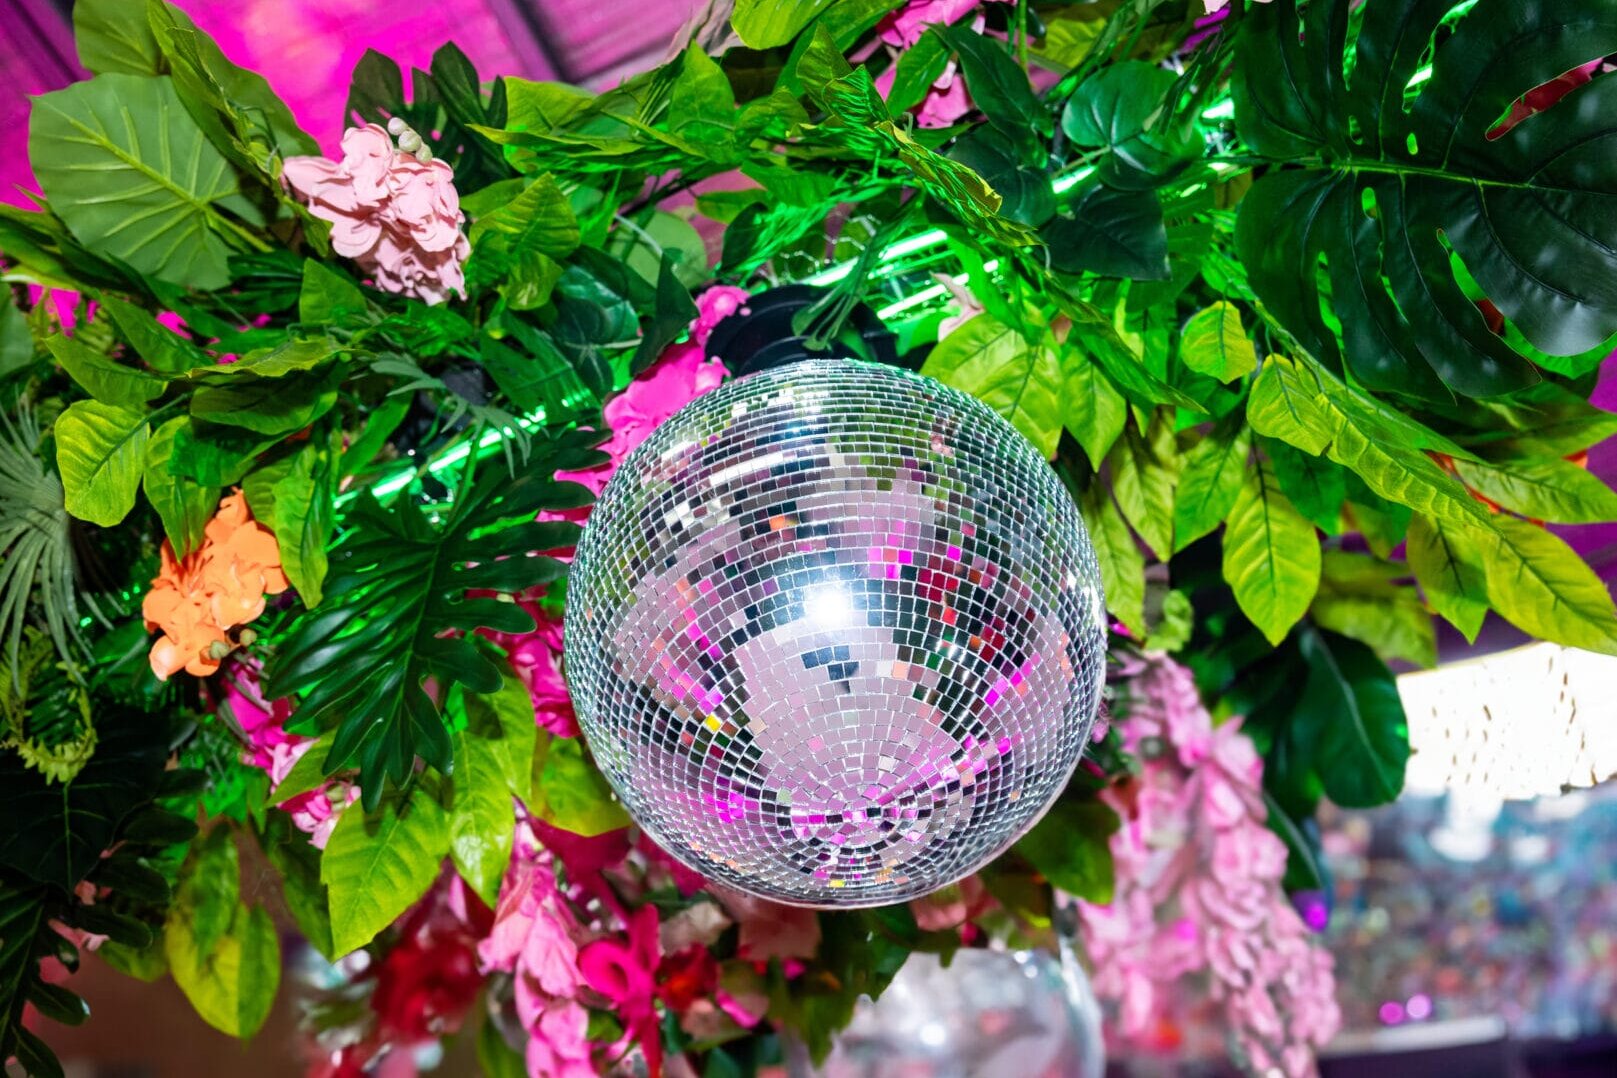 Silver mirror ball surrounded by tropical greenery and flowers